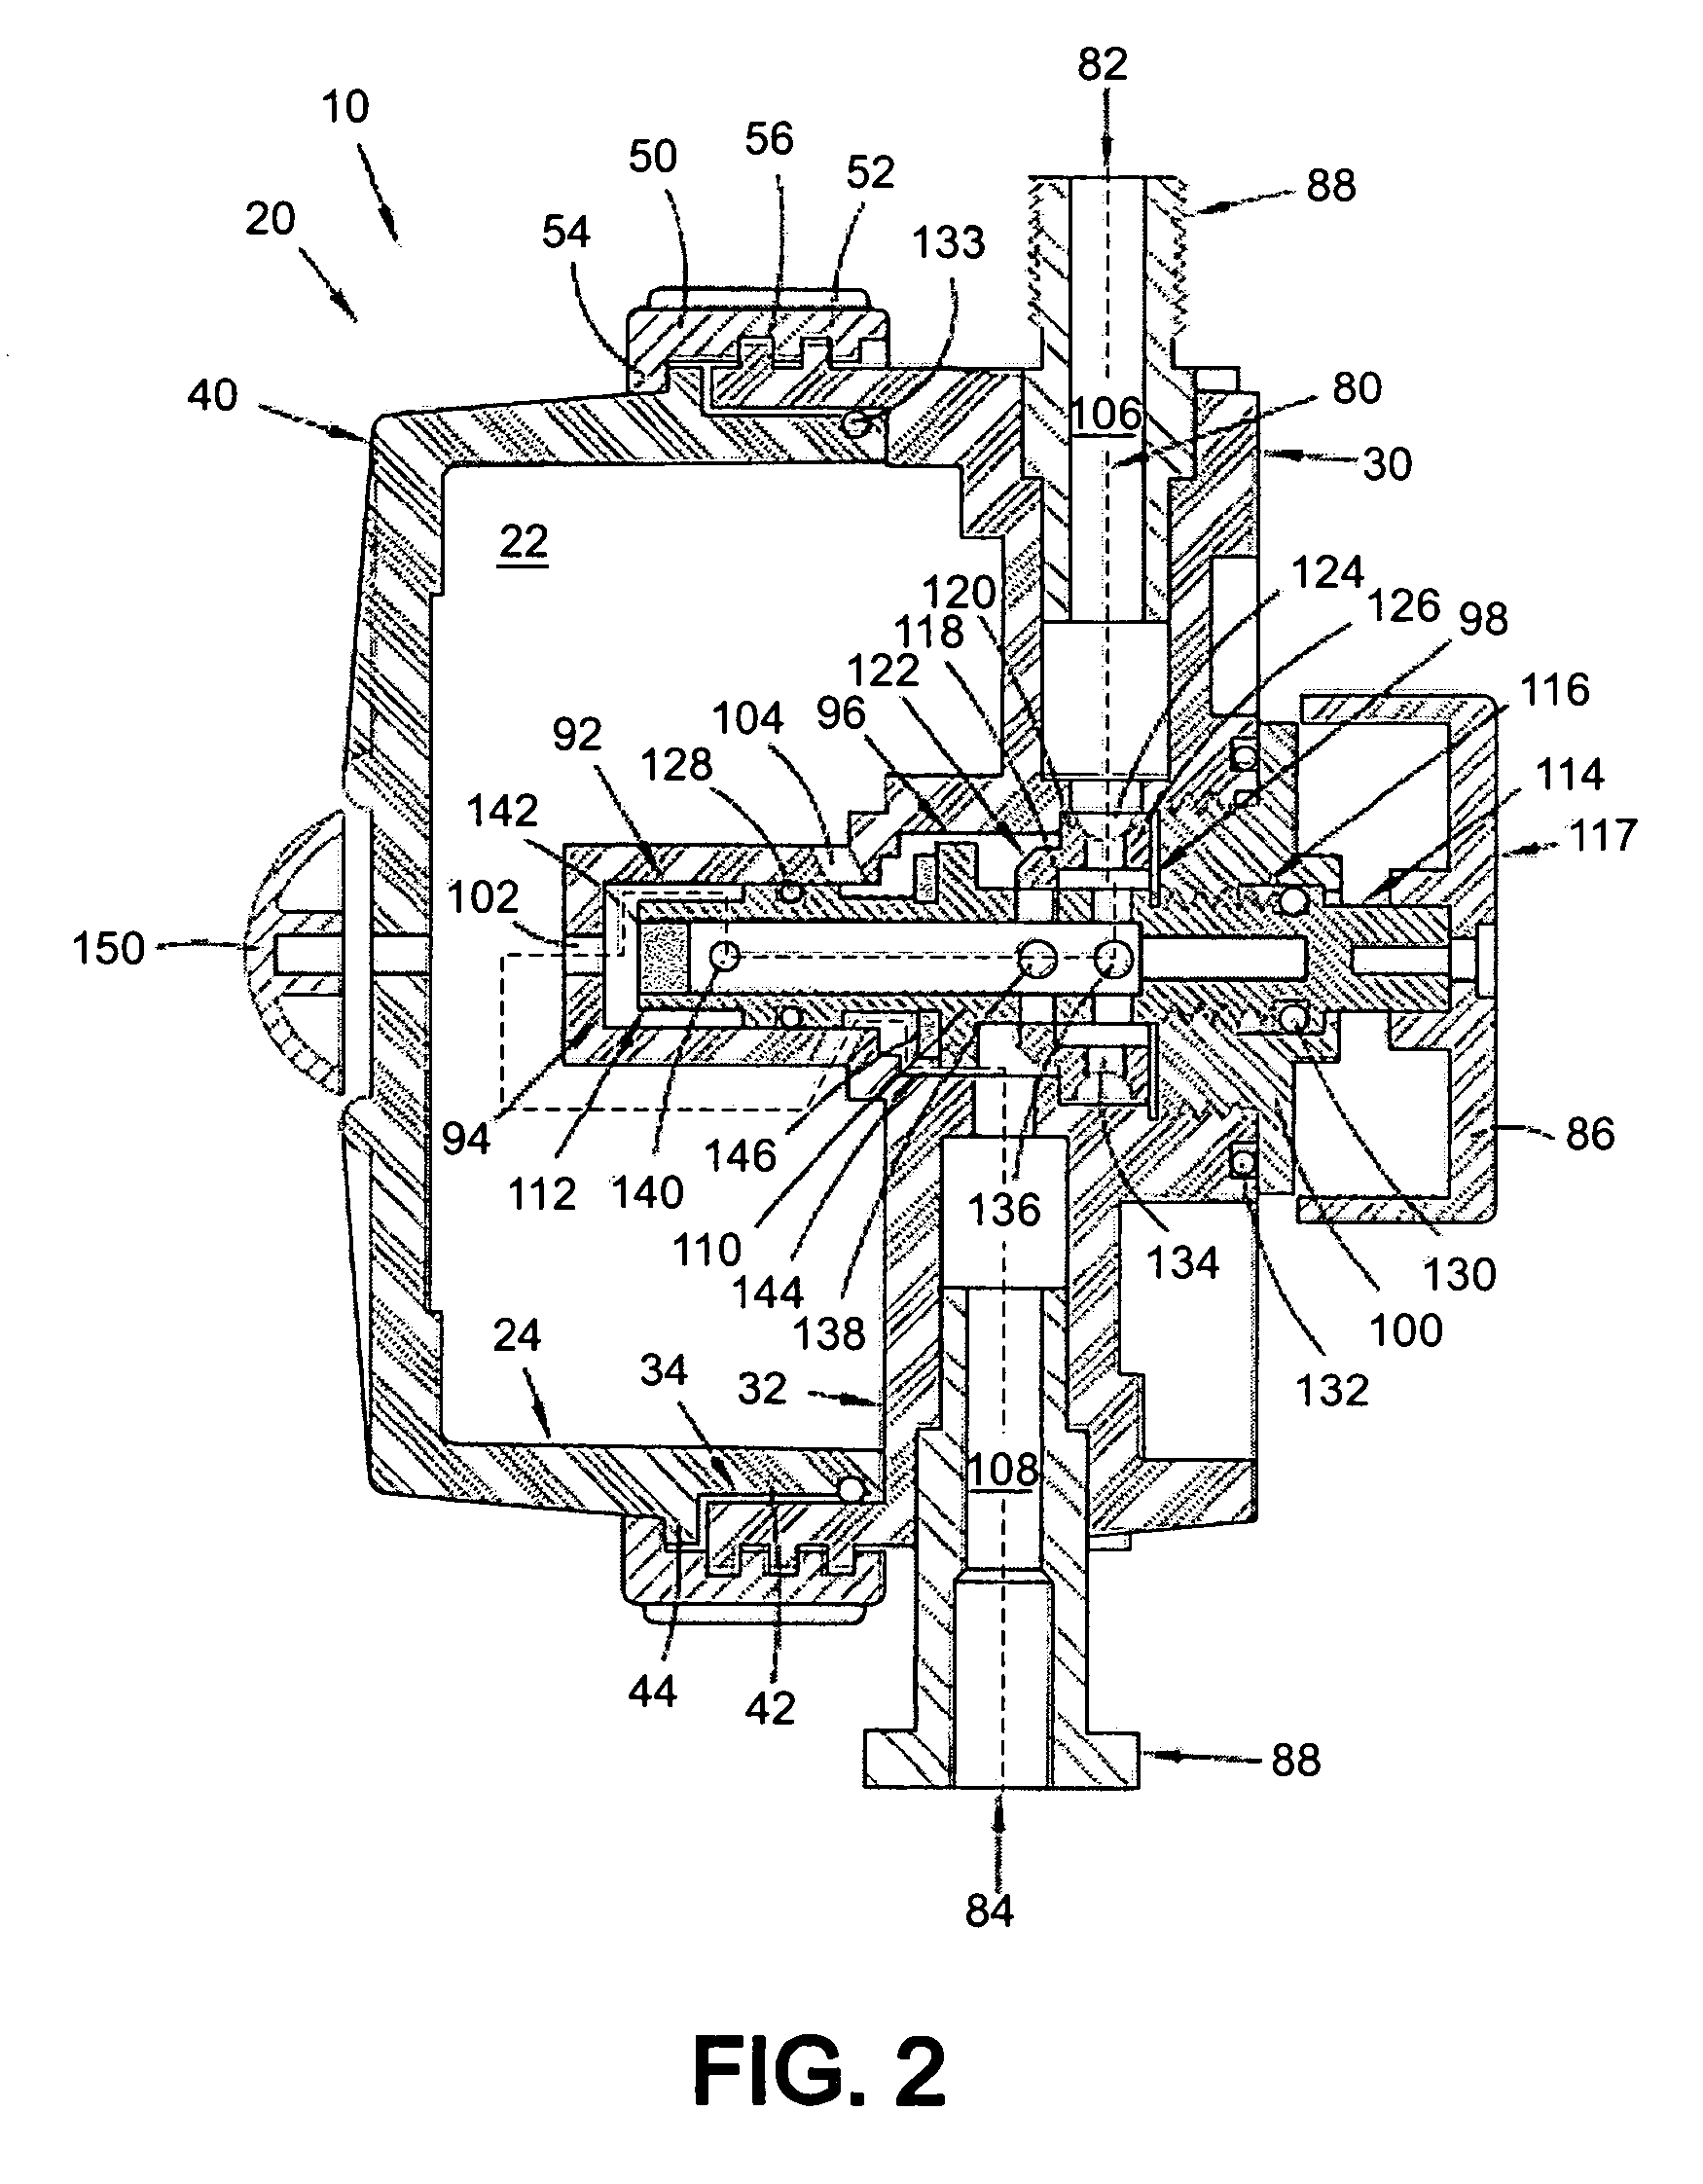 In-line fluid treatment device and system